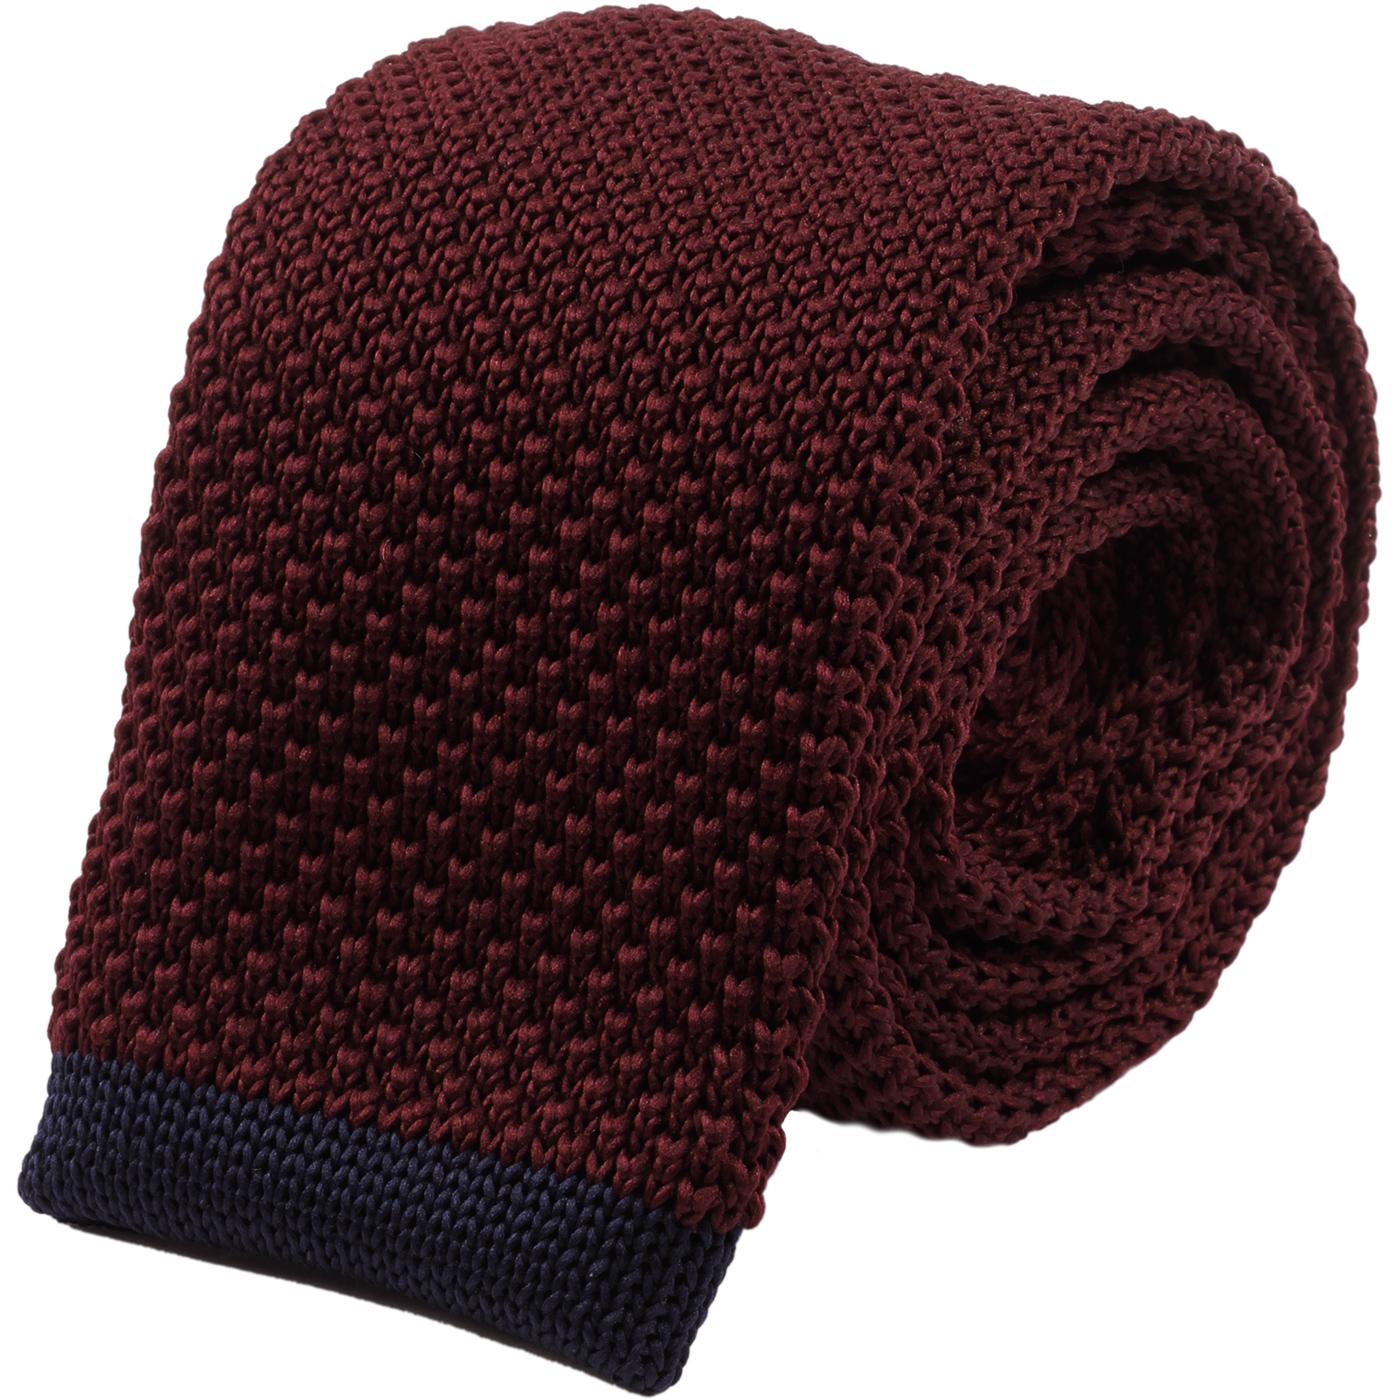 GIBSON LONDON Mod Square End Knit Tie (Burgundy)